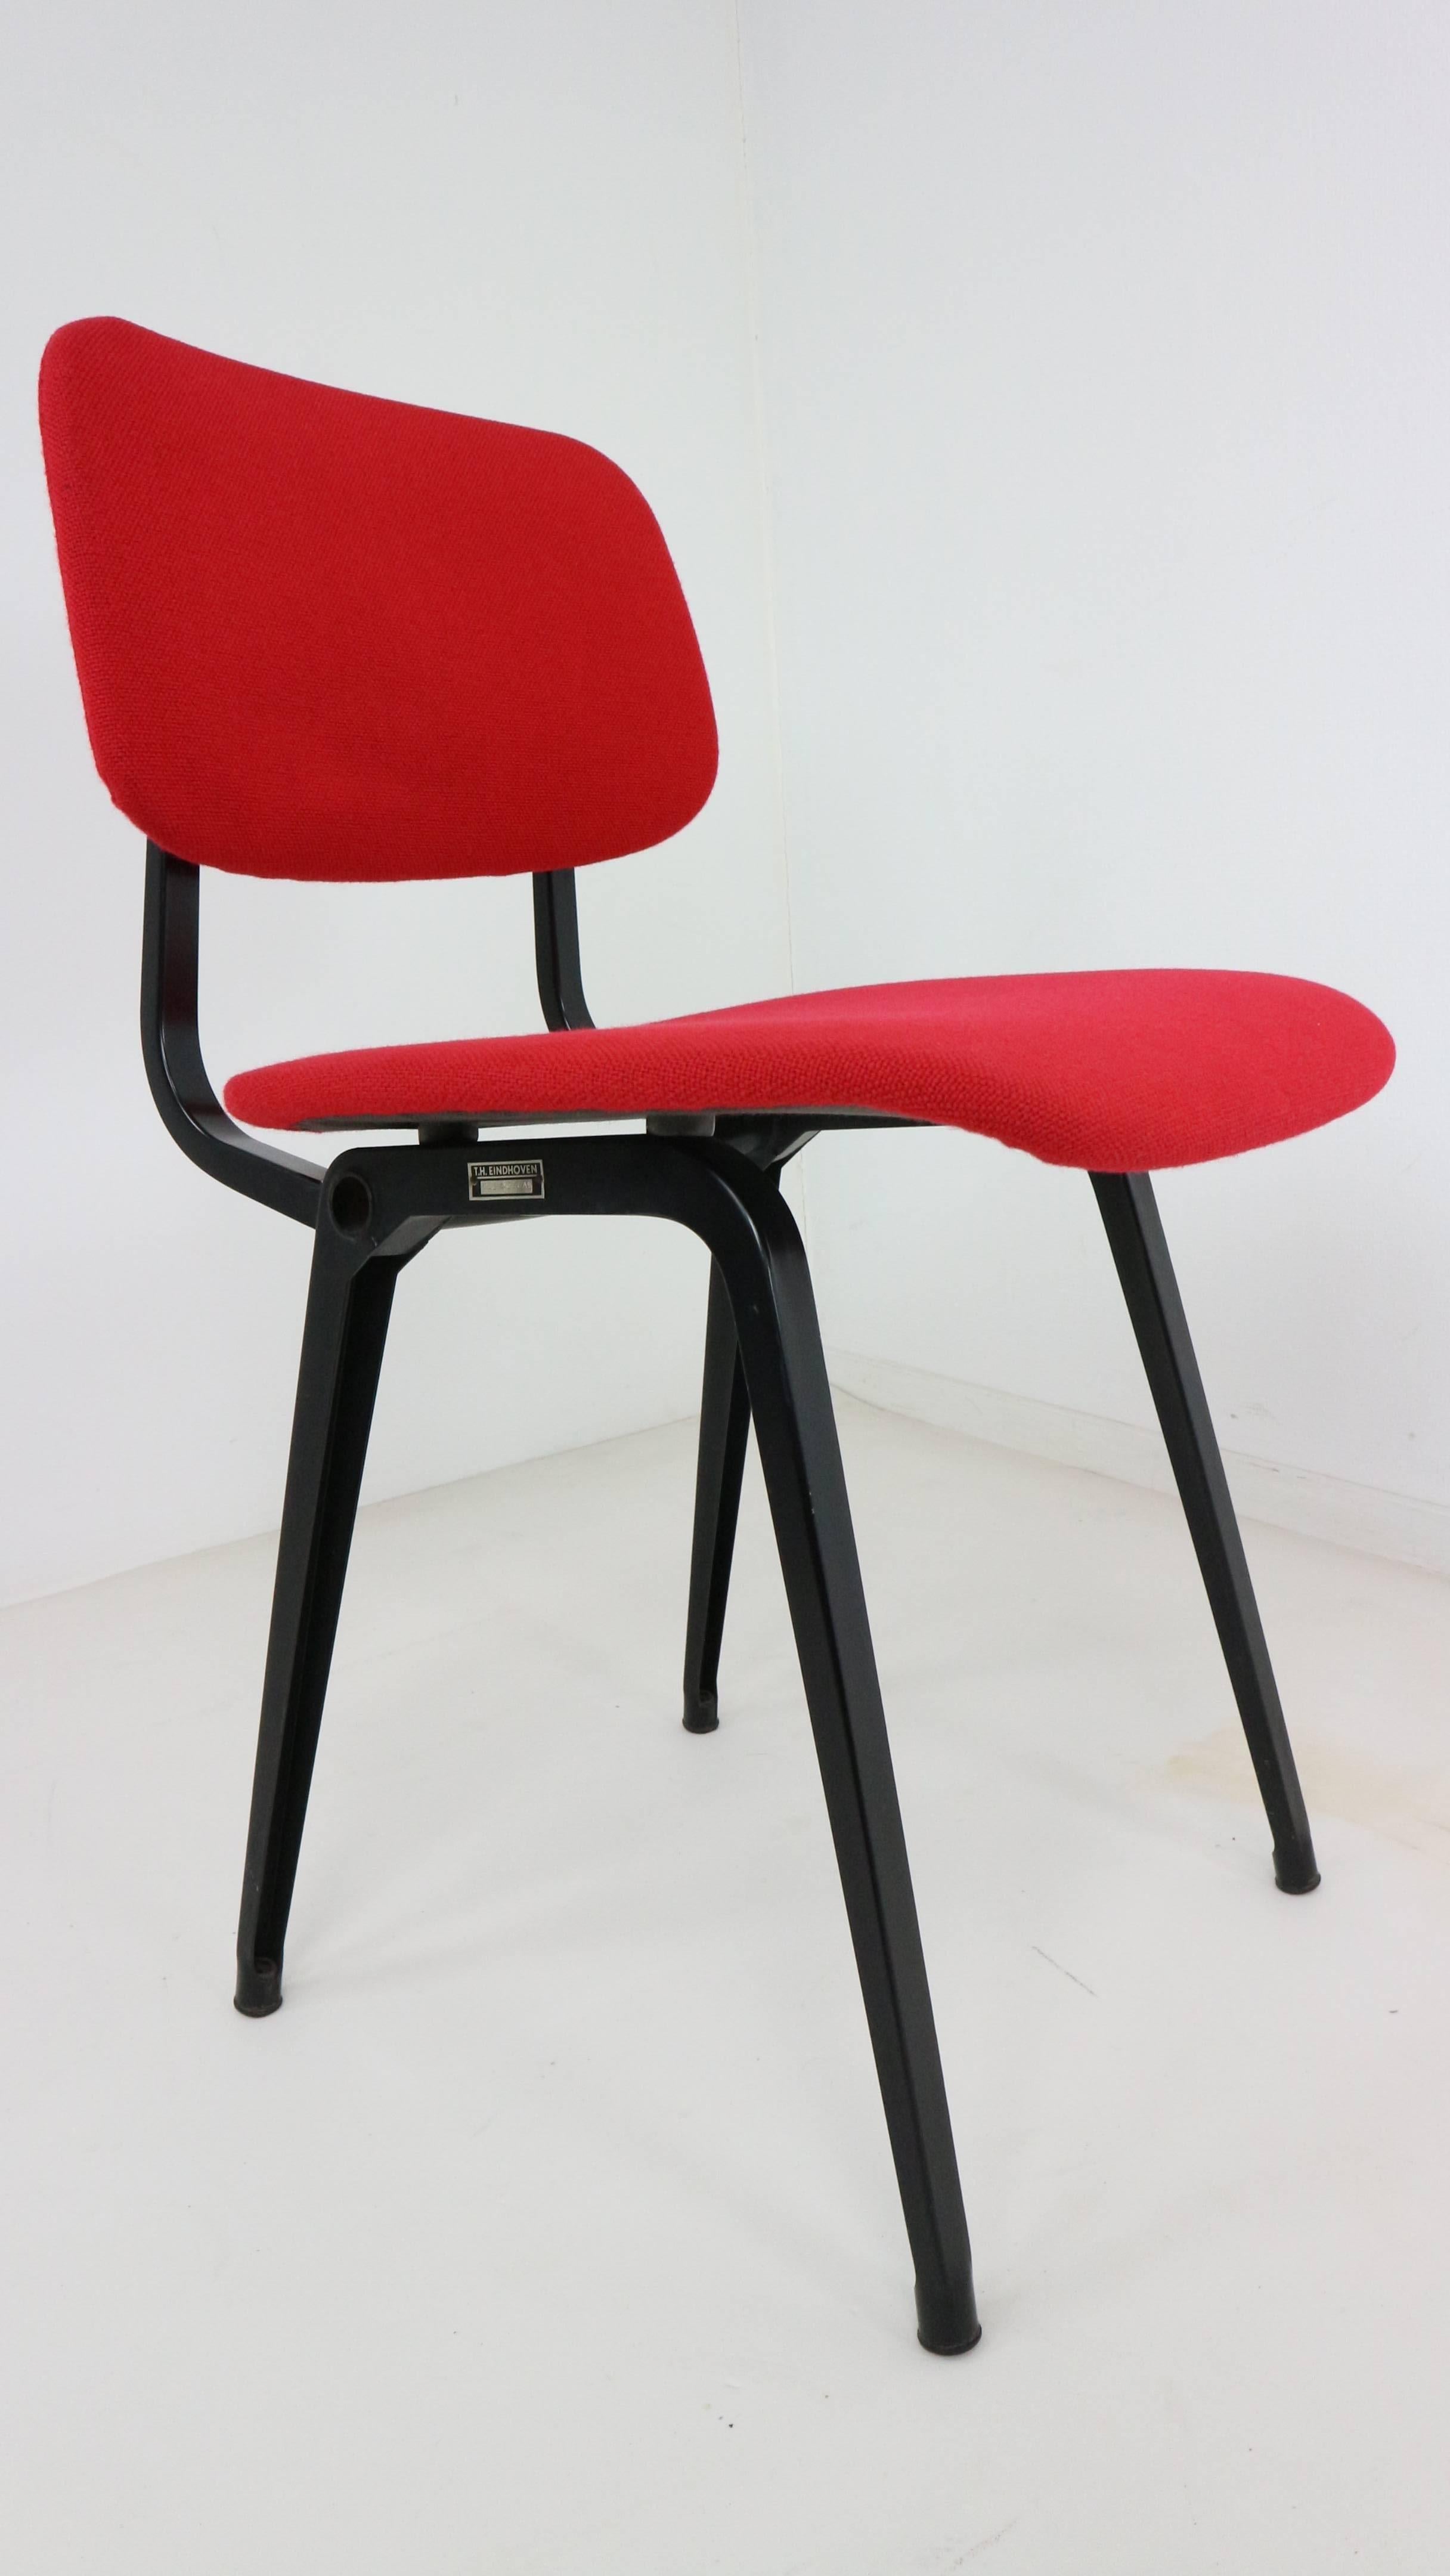 Revolt armchairs designed by Friso Kramer for Ahrend de Cirkel, Holland, 1953. Though the revolt chair was already designed in 1953, the production started in 1958. The most chairs have stickers with the Ahrend de Cirkel logo, also impressed at the